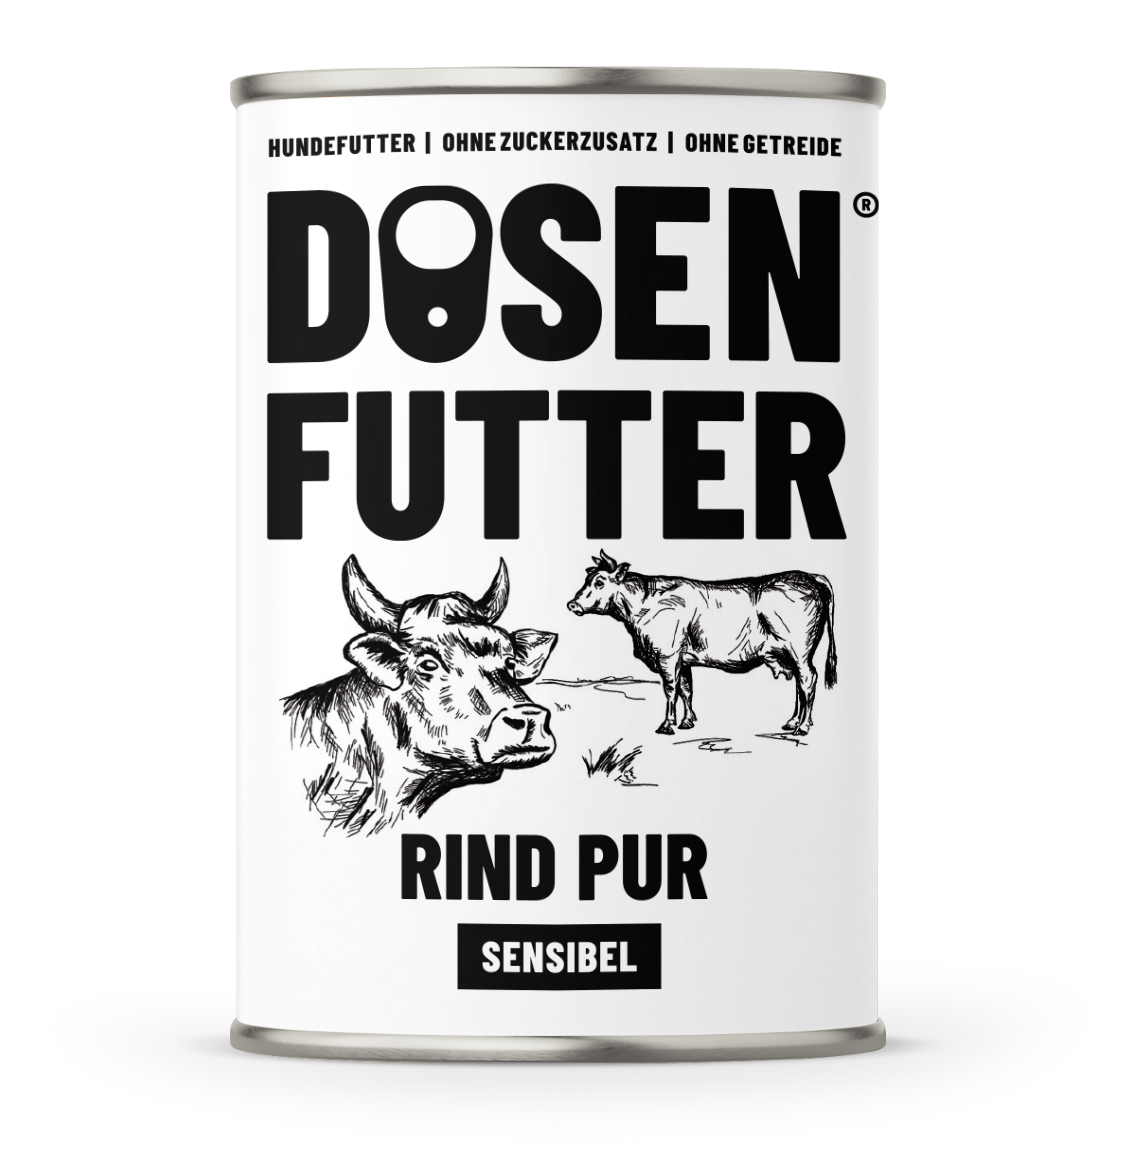 Dosenfutter® RIND PUR SENSIBLE 6x400g